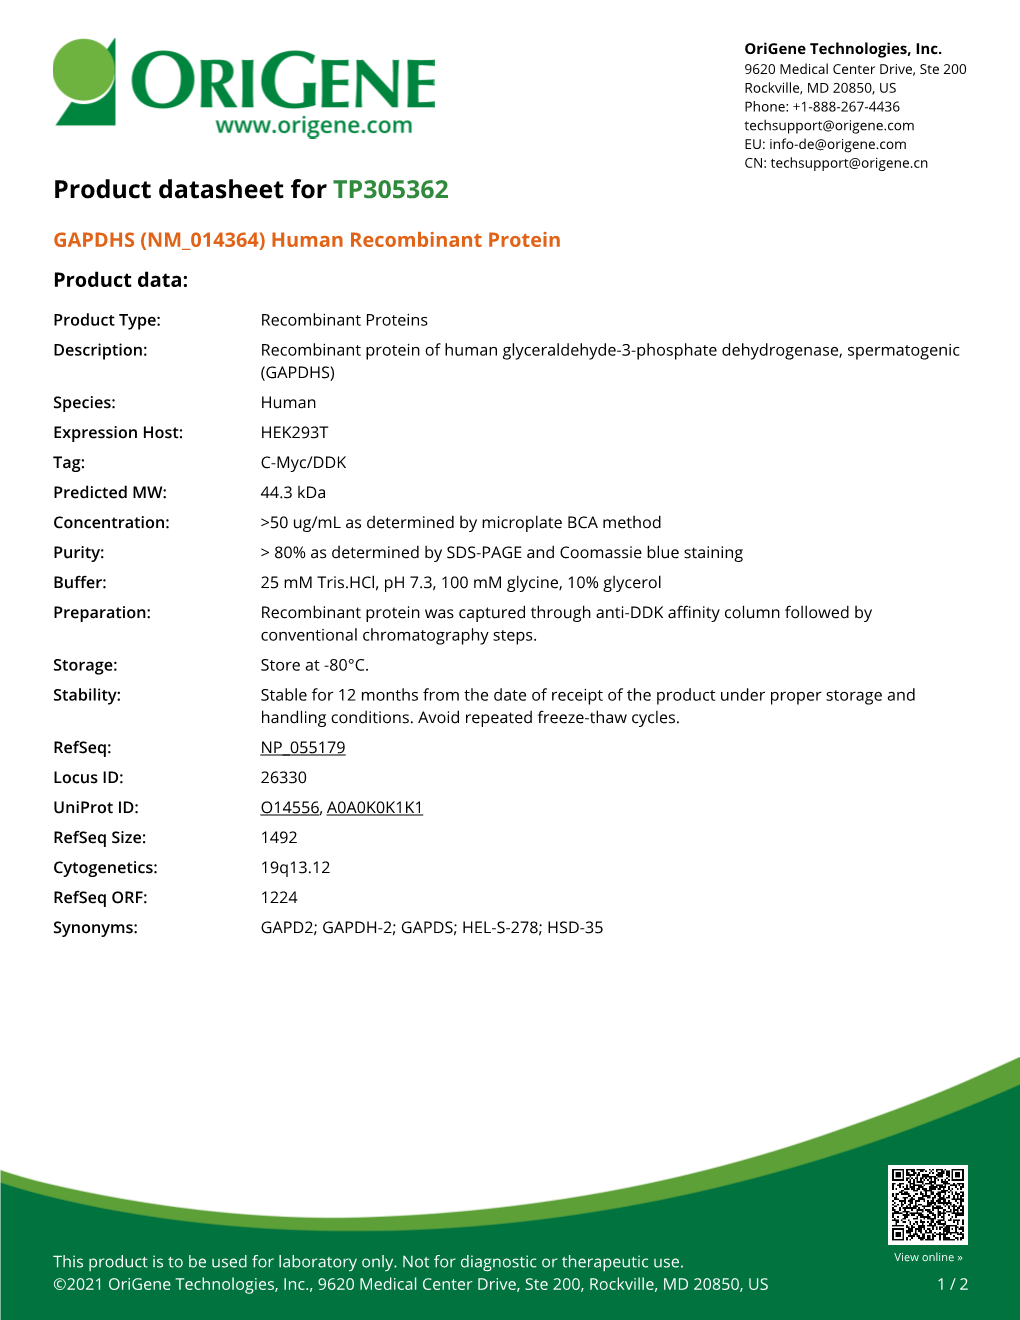 GAPDHS (NM 014364) Human Recombinant Protein Product Data